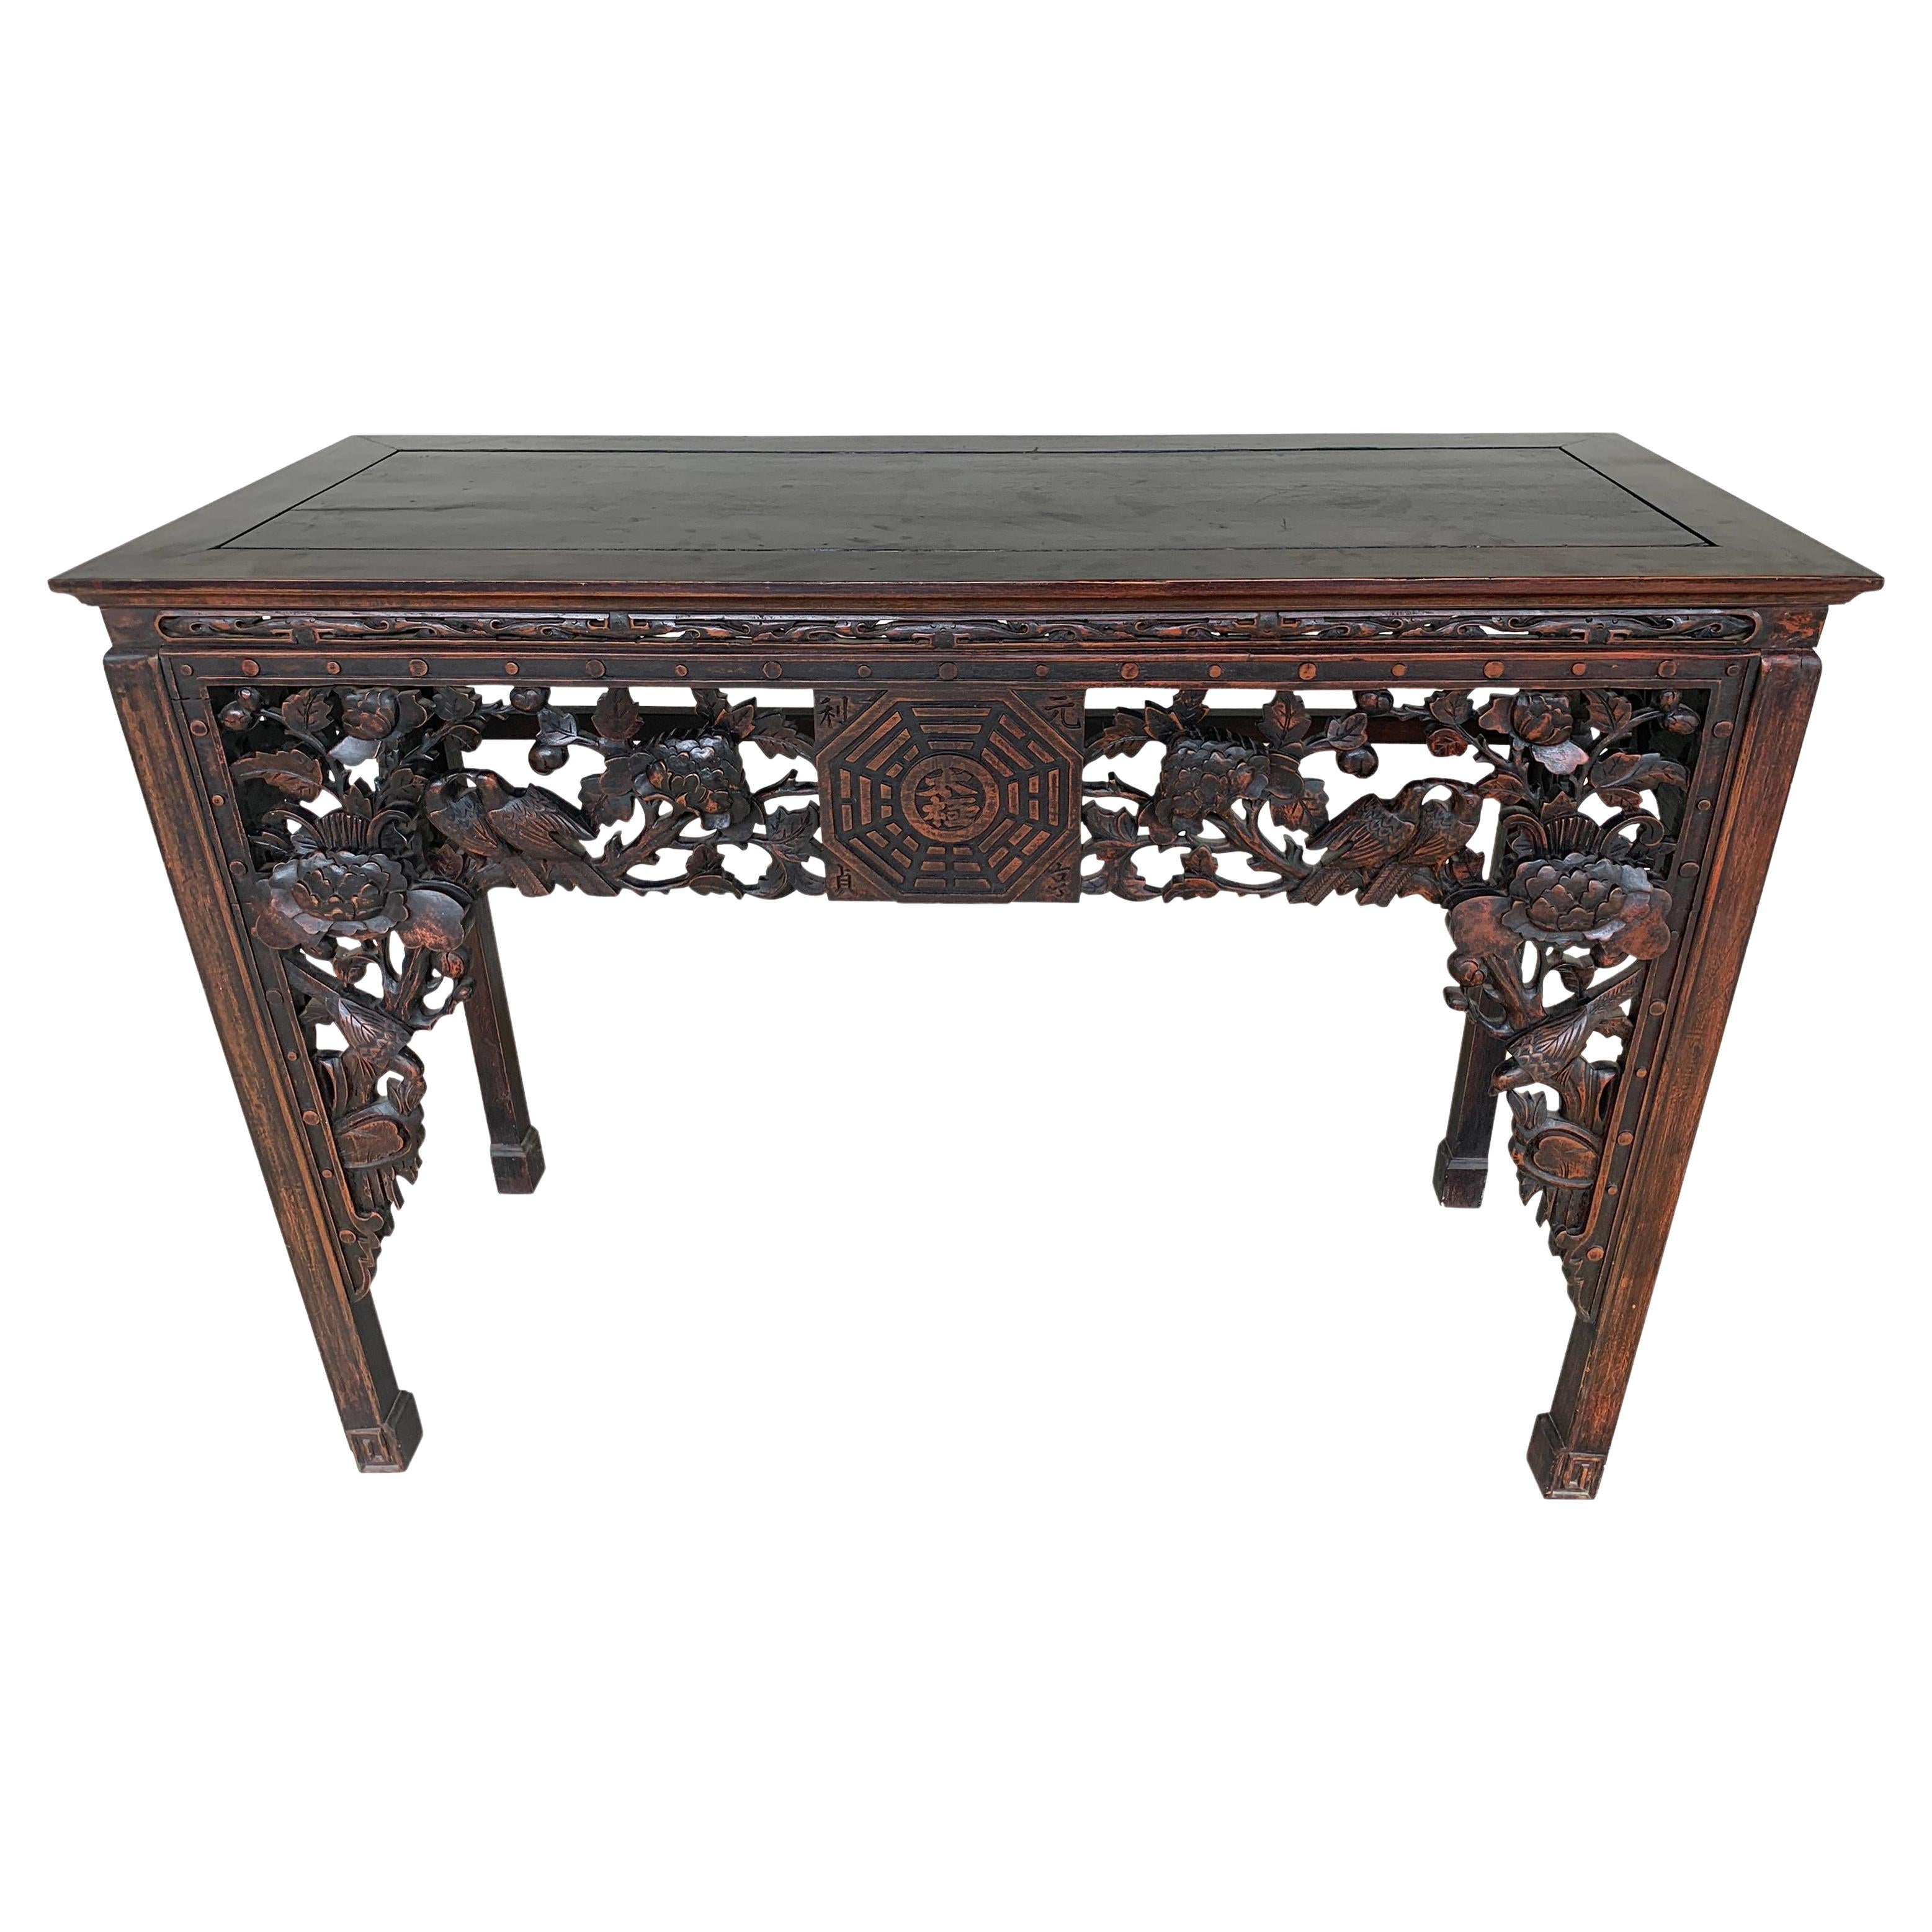 19th Century Chinese Export Hardwood Altar Table